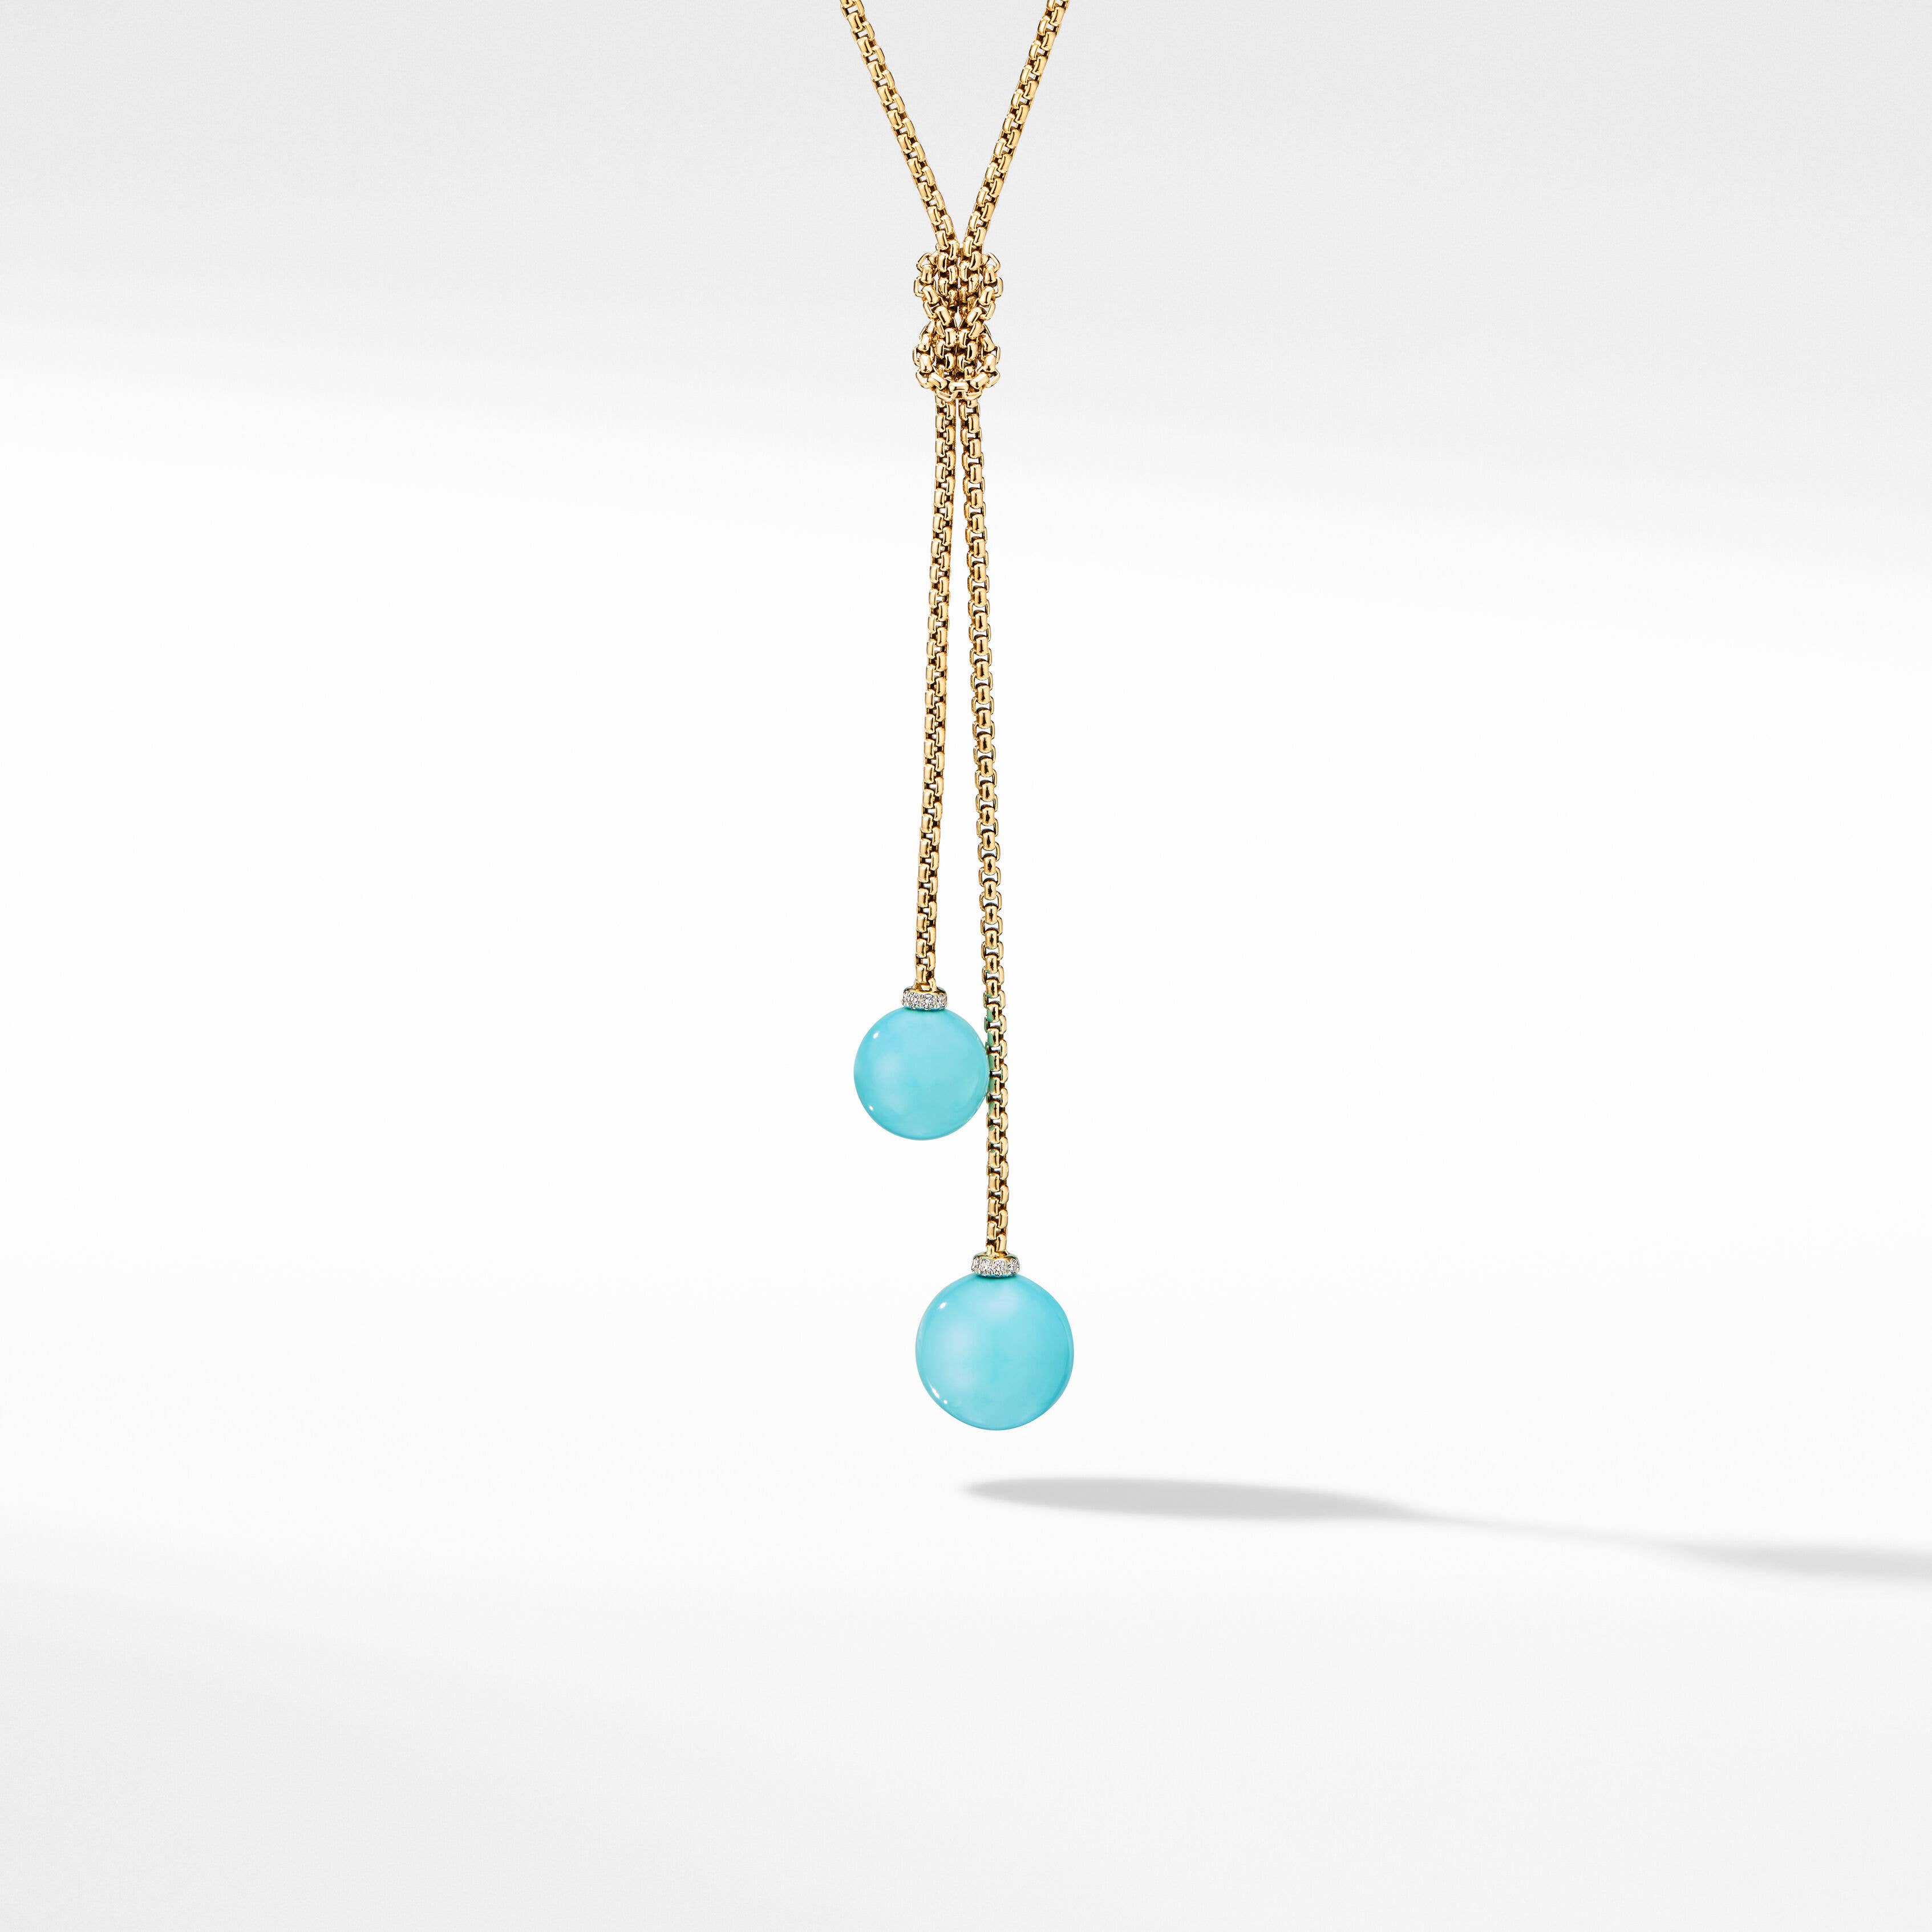 Solari Y Necklace in 18K Yellow Gold with Turquoise and Pavé Diamonds